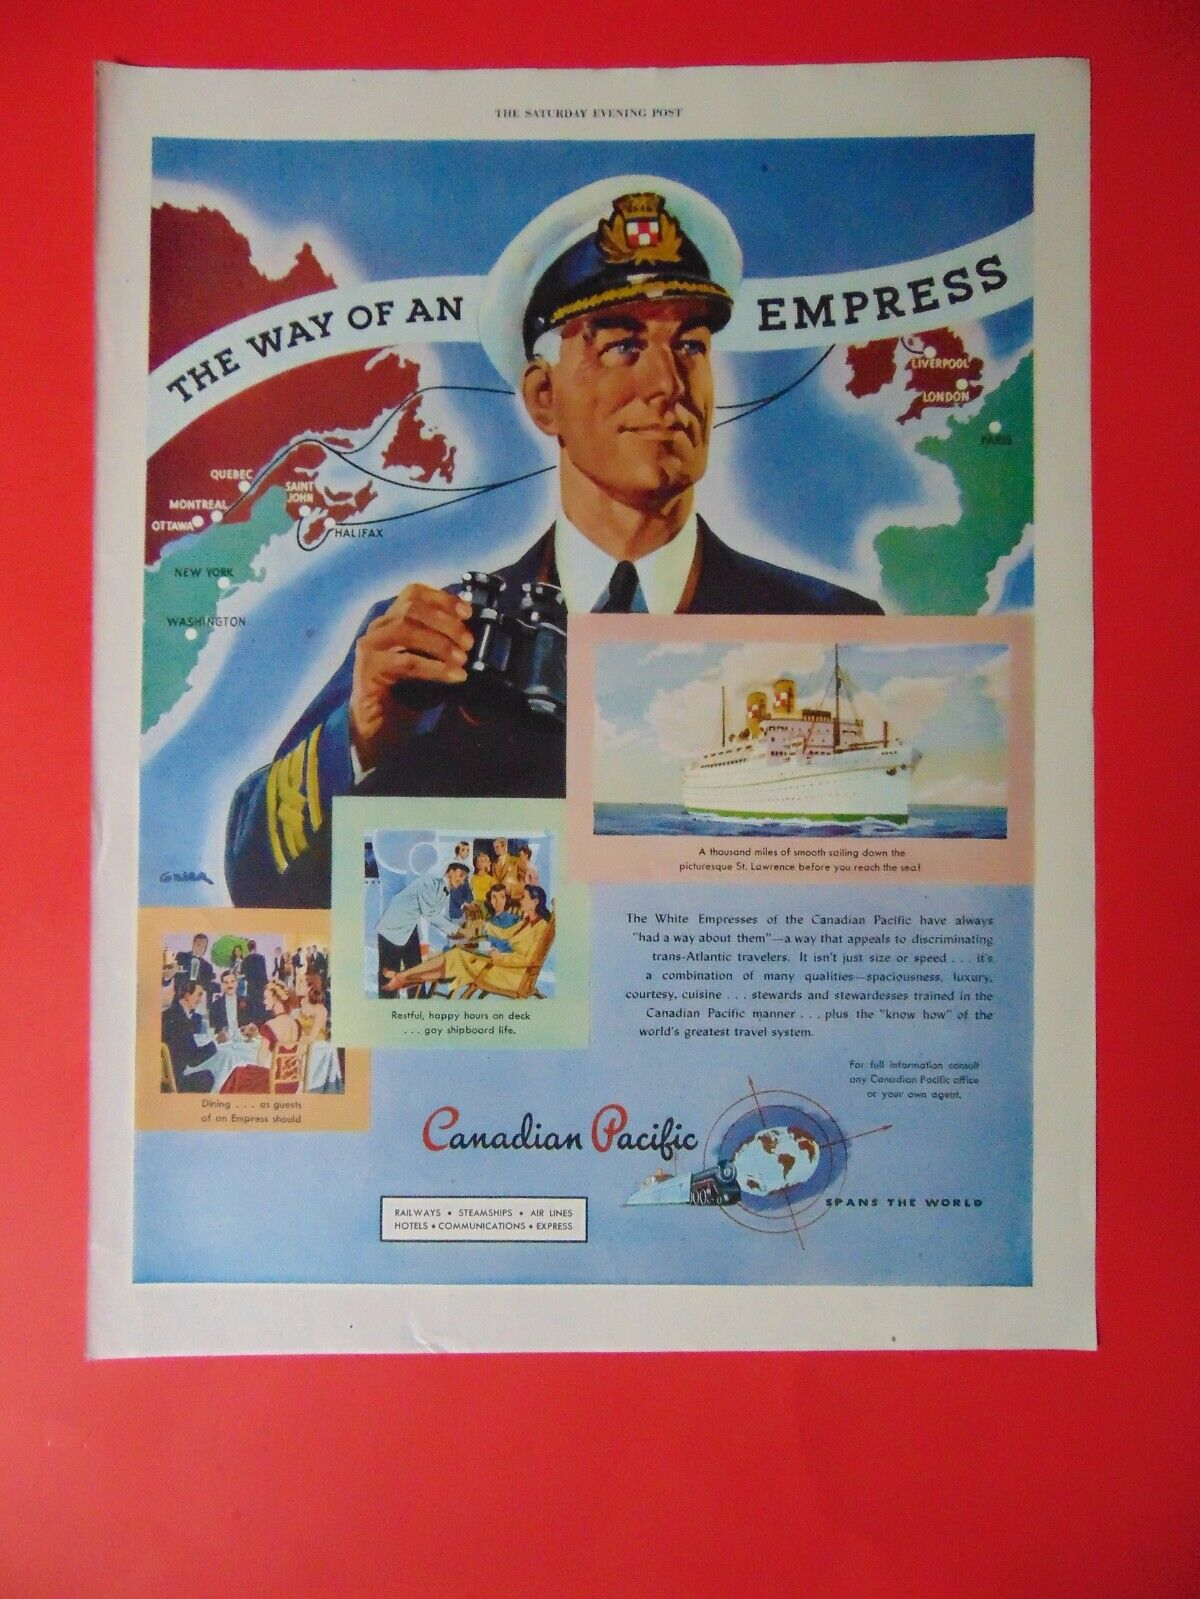 1947 The EMPRESS SHIP CANADIAN PACIFIC St. Lawrence Seaway art print ad